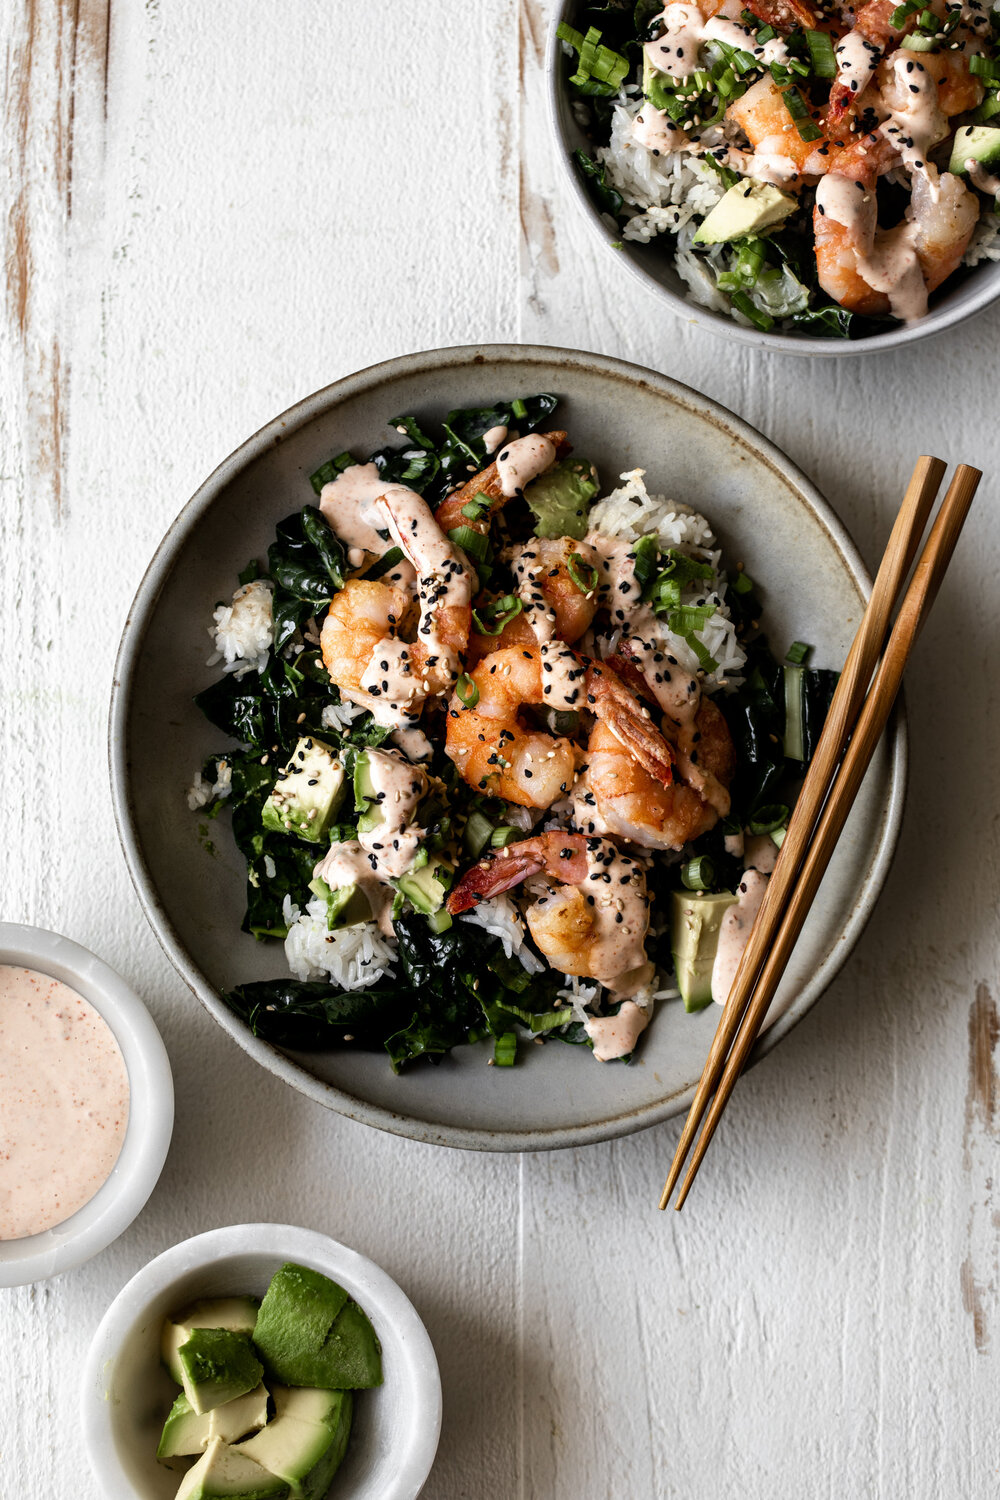 Spicy shrimp bowl with crispy rice and kale recipe from cooking with cocktail rings